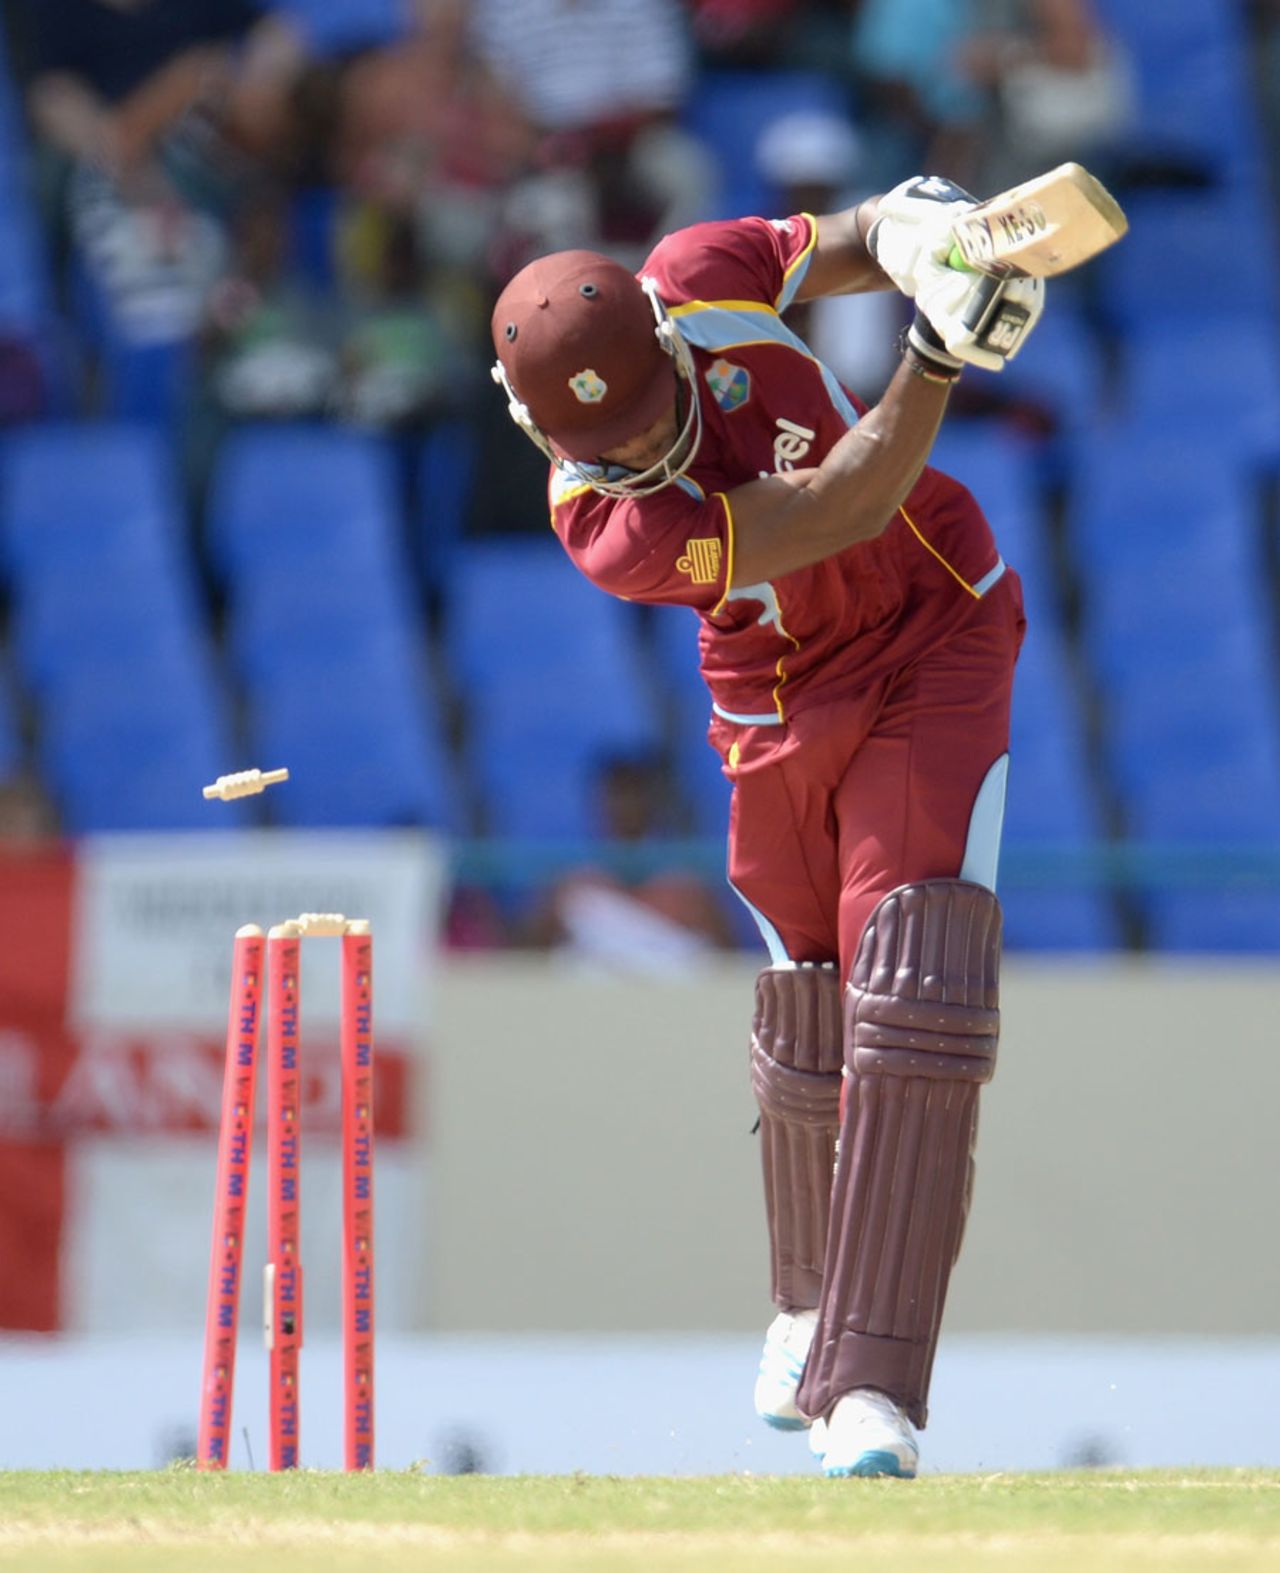 Kirk Edwards was bowled cheaply, West Indies v England, 1st ODI, North Sound, February, 28, 2014